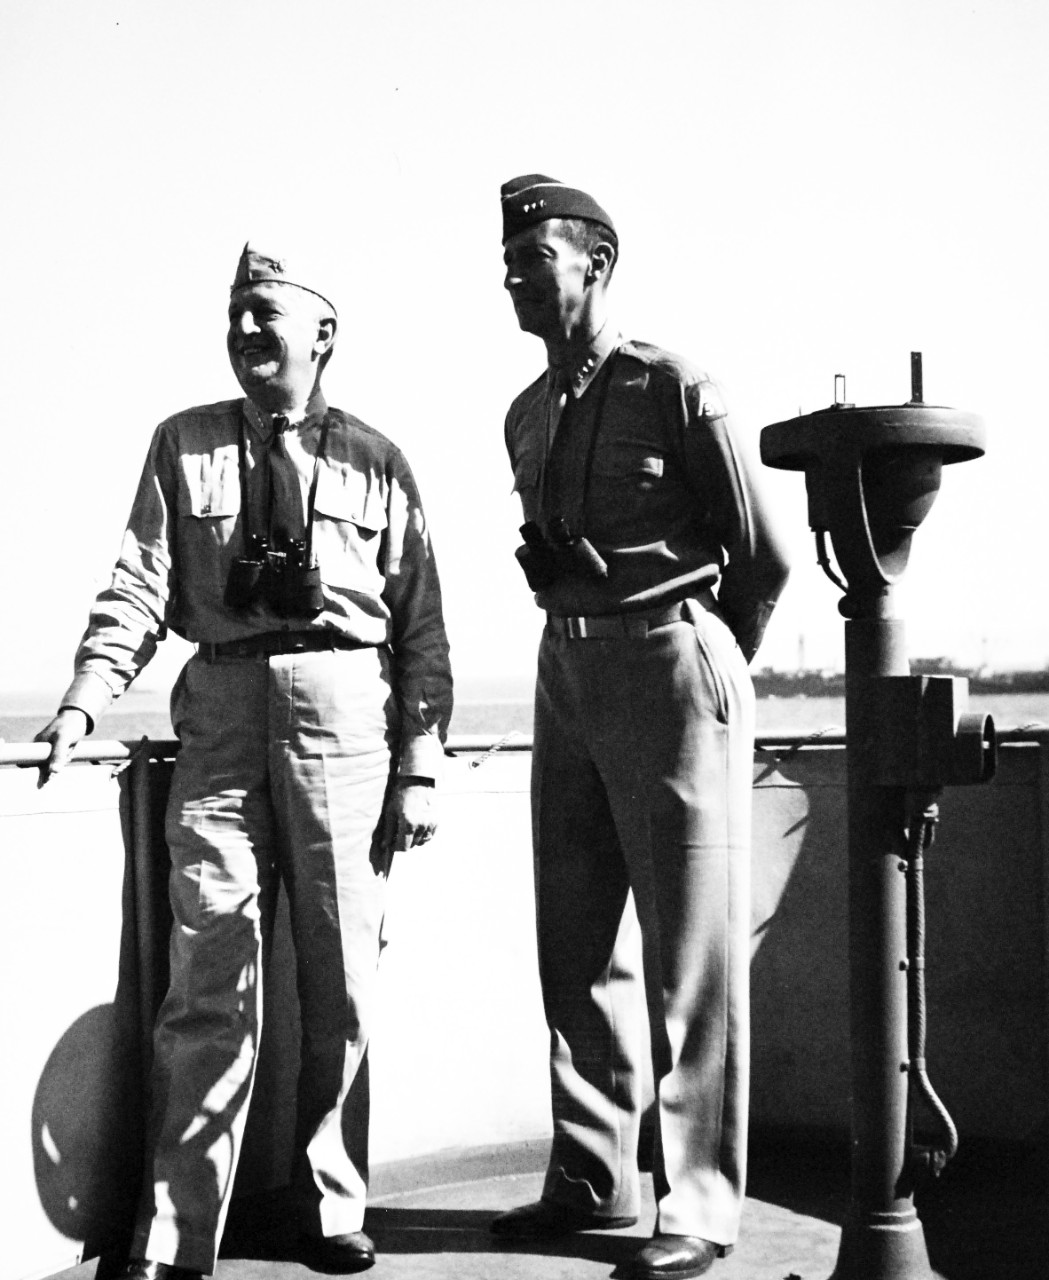 80-G-87317:  Operation Avalanche, September 1943.  Admiral H.Kent Hewitt, USN, and Lieutenant General Mark W. Clark, USA, onboard USS Ancon (AGC 4) during operations at Salerno, Italy.  Photograph released September 12, 1943.   U.S. Navy photograph, now in the collections of the National Archives.  (2017/04/04).